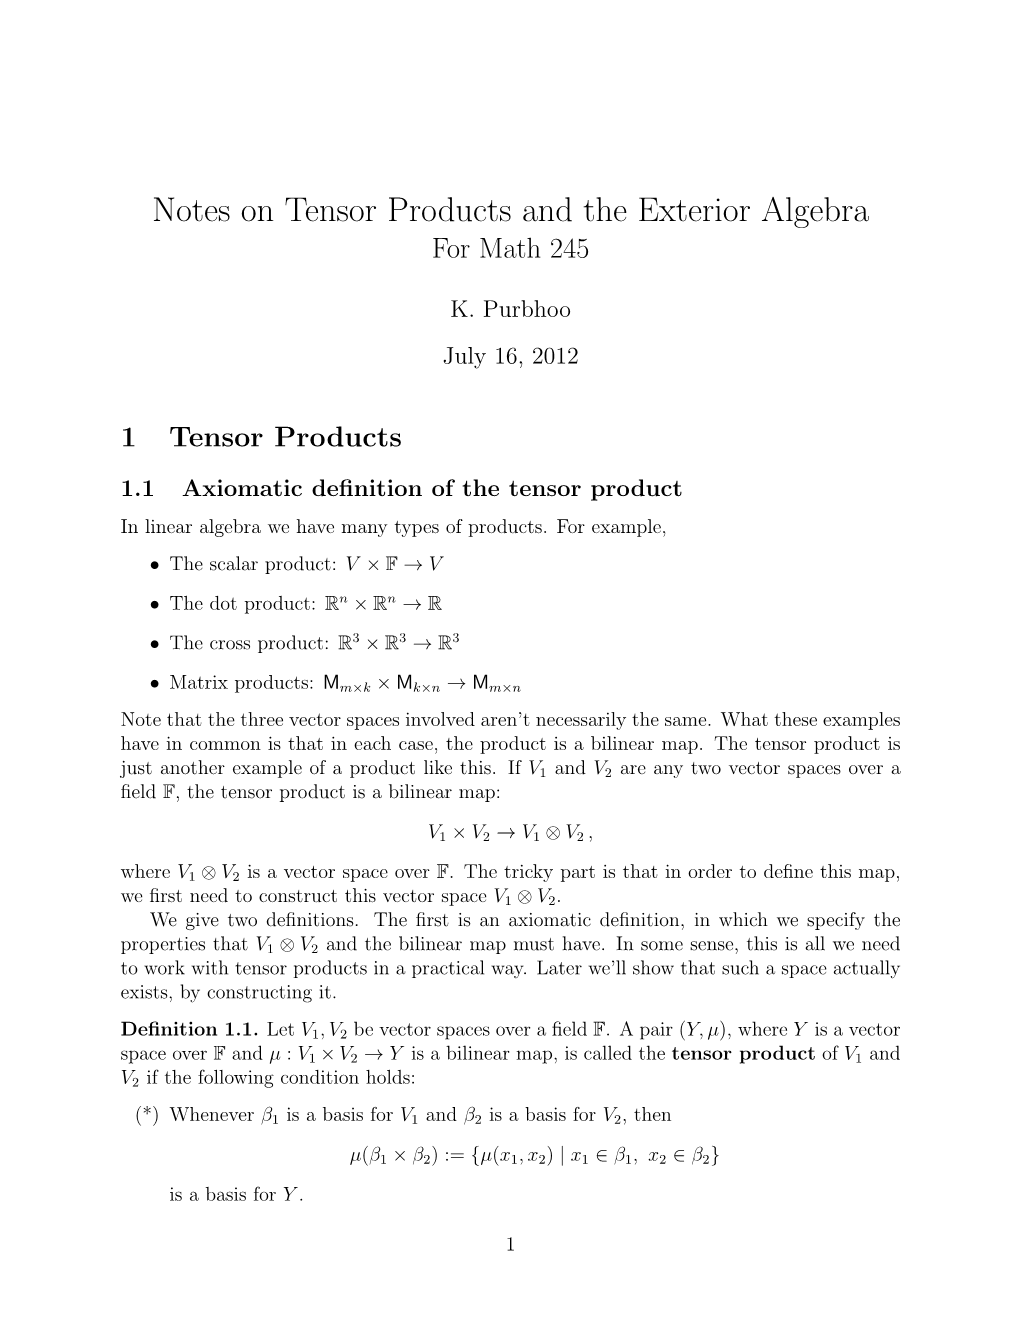 Notes on Tensor Products and the Exterior Algebra for Math 245